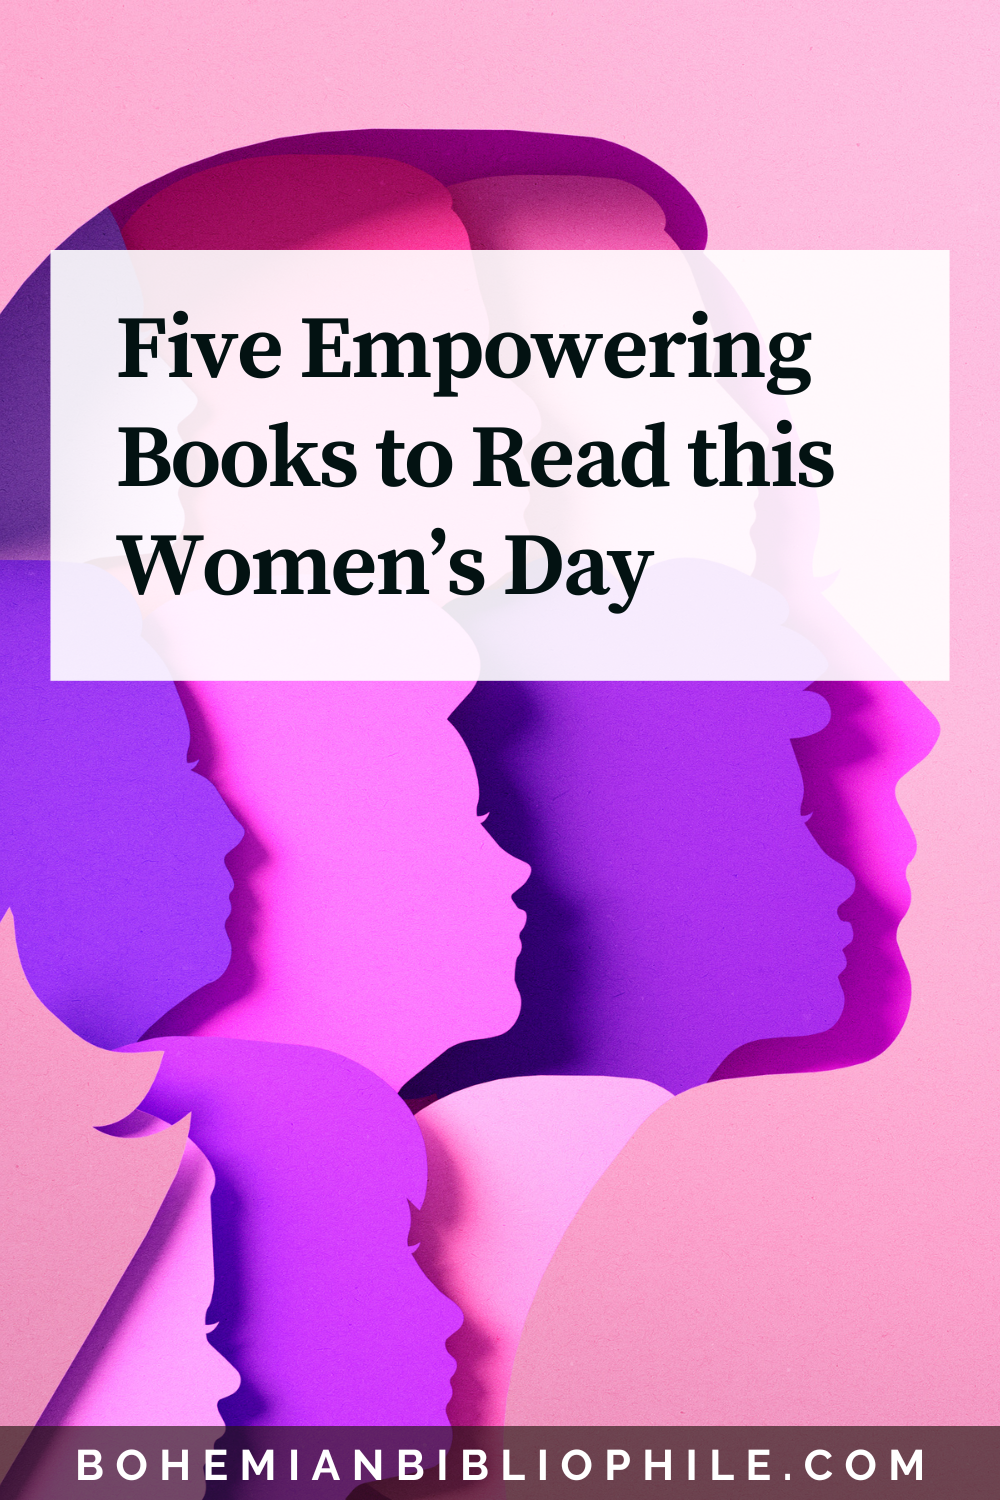 Five Empowering Books to Read this Women's Day